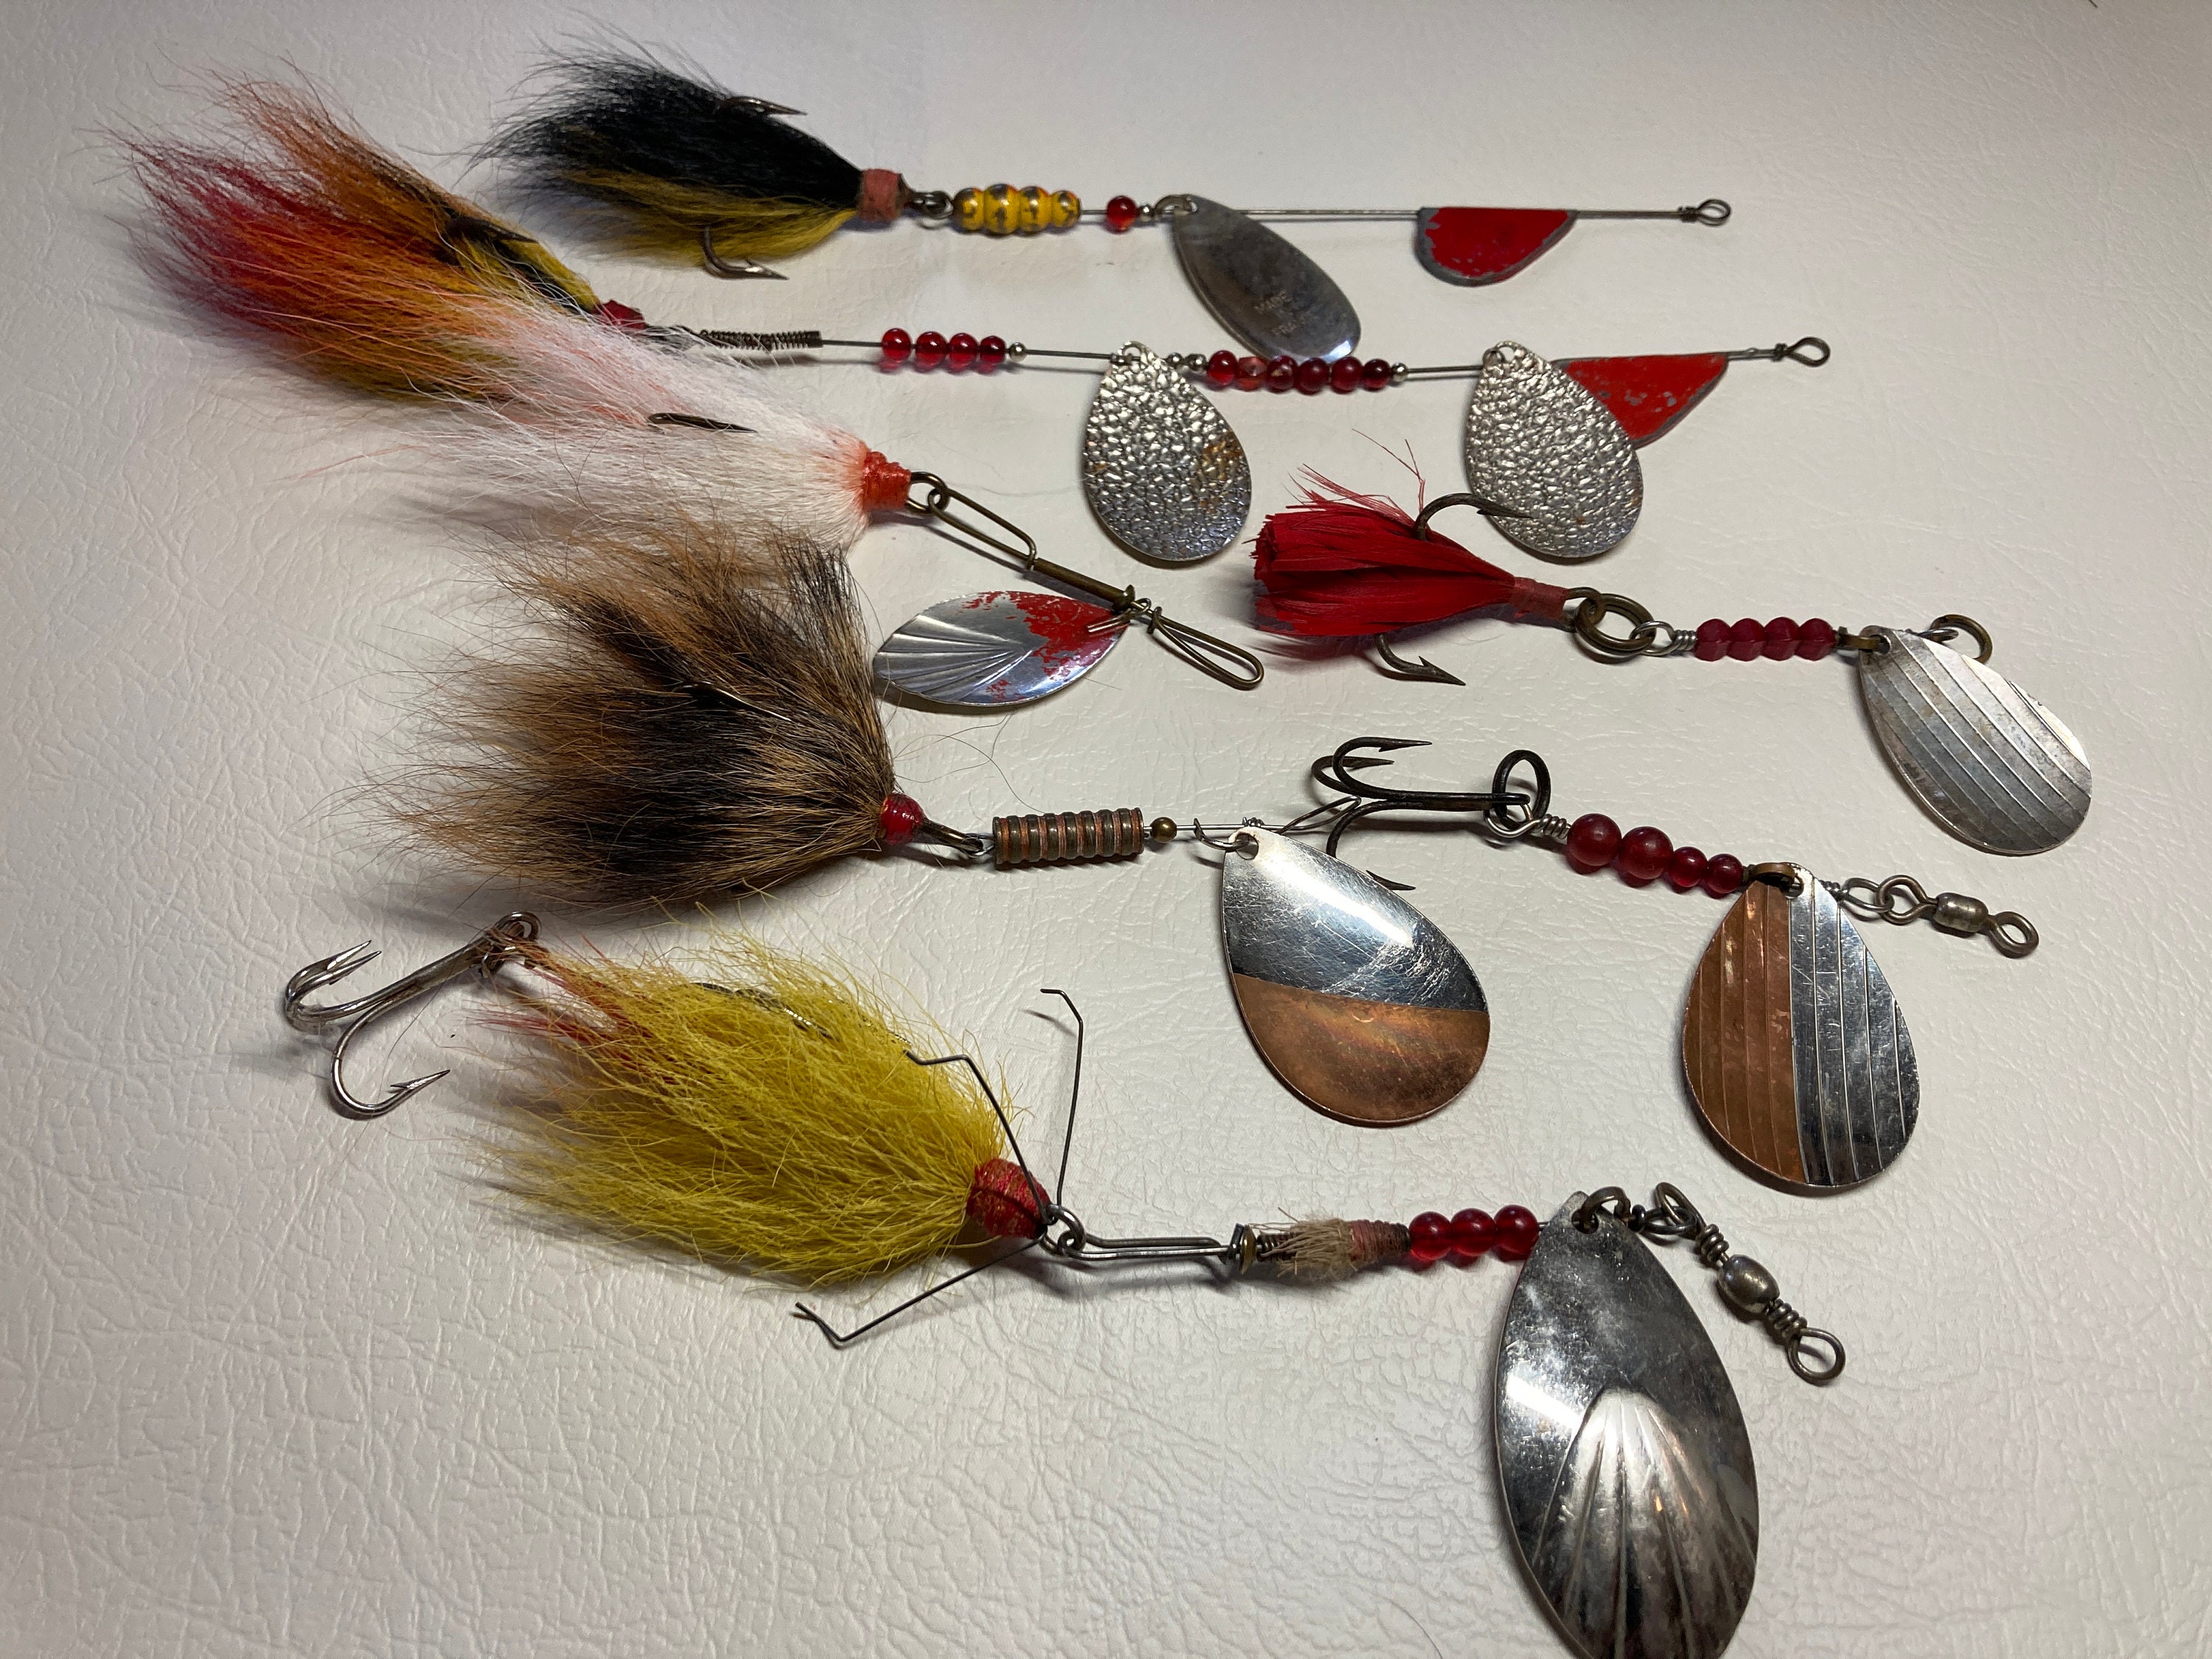 Vintage Fishing Lures Collection. Large Old Rare Tackle Spinners